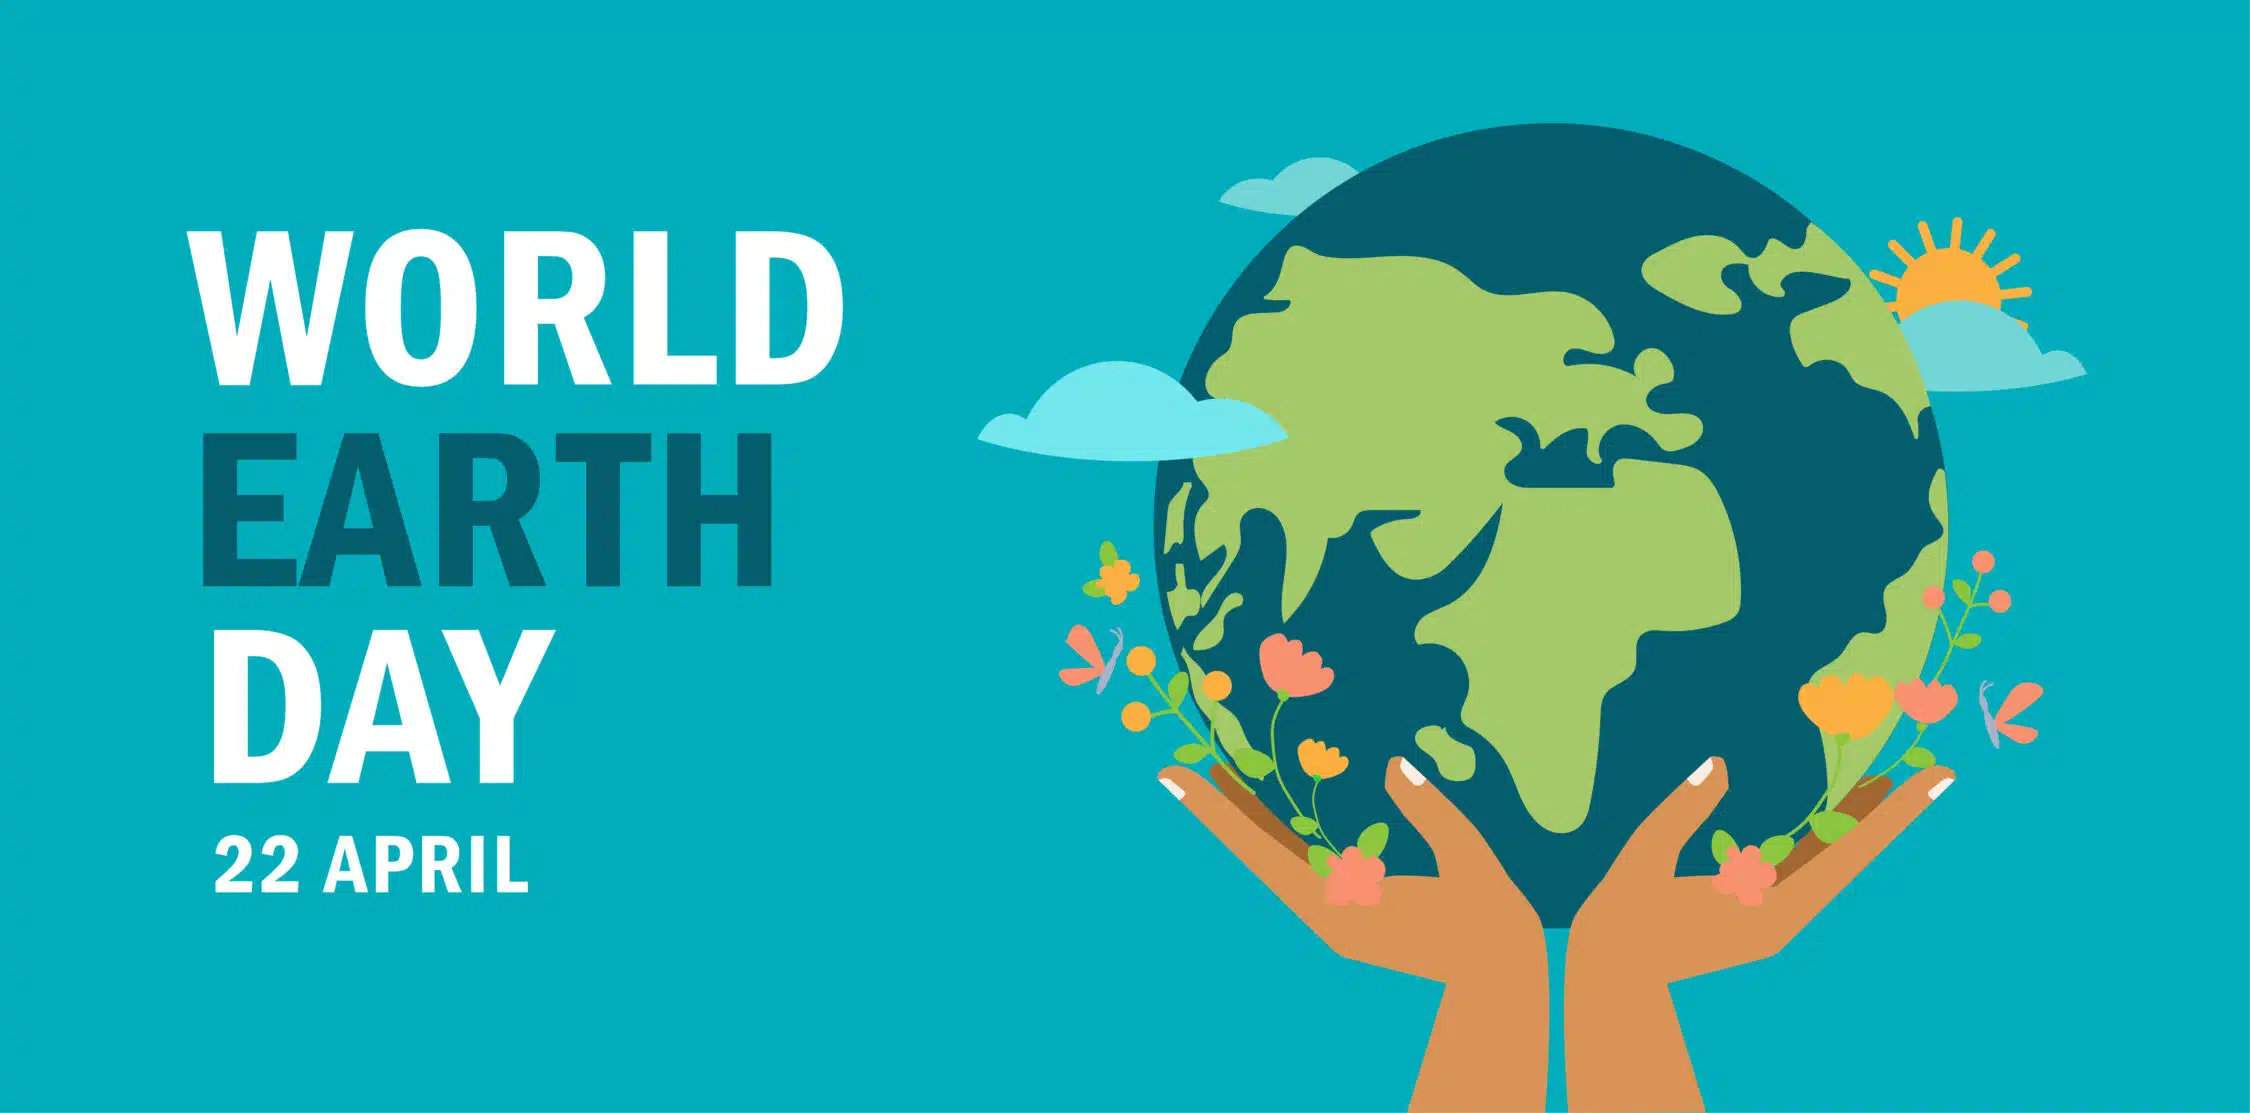 World earth day concept, hands holding globe